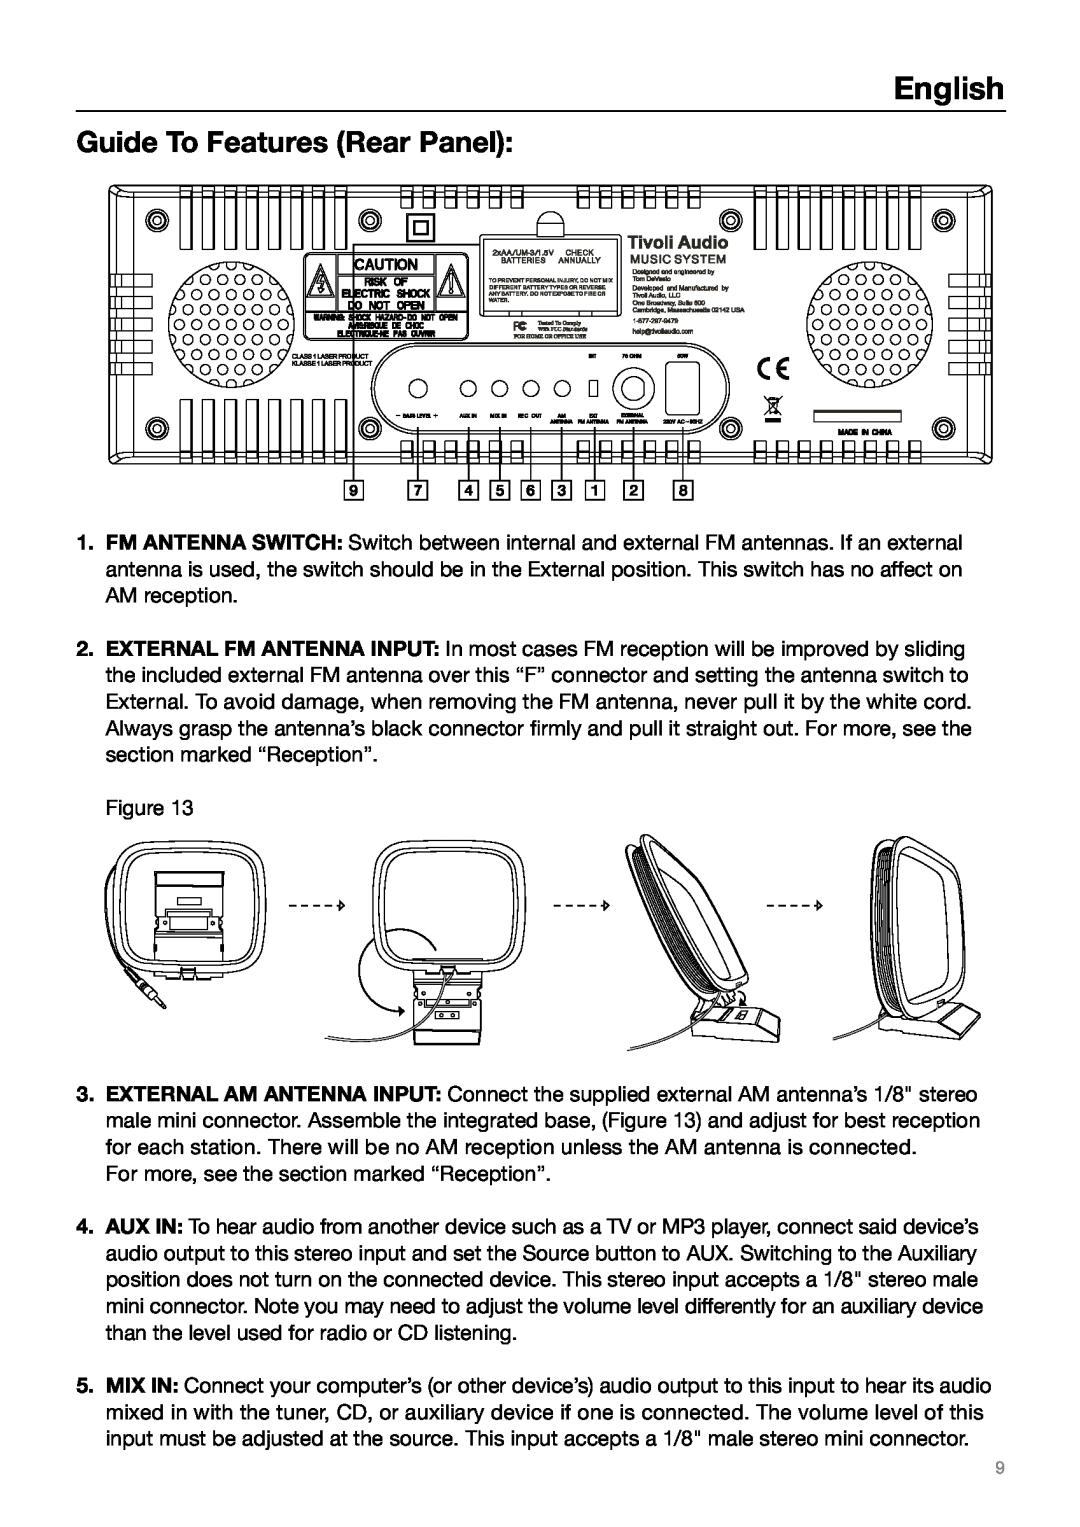 Tivoli Audio MUSIC SYSTEM owner manual Guide To Features Rear Panel, English 